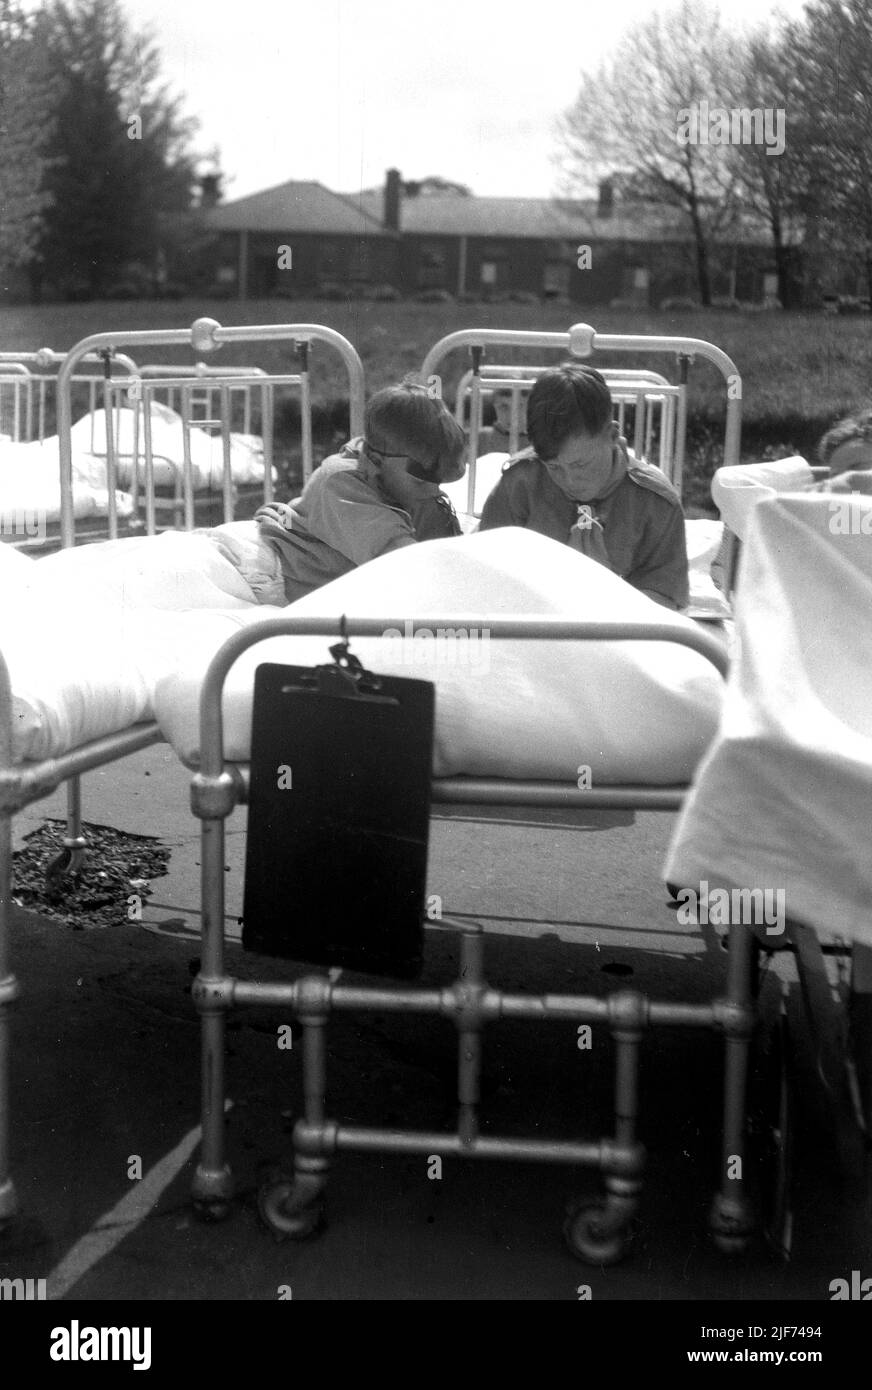 1942, historical, wartime and two cub scouts sitting in metal hospital beds outside The Queen Mary's Hospital for Children at Carshalton, London, England, UK. Built in 1908 as the Southern Hospital, it became a children's infirmary in 1909 and renamed after a visit by Queen Mary in 1915. It was the most heavily bombed hospital in the greater London area, with the first attack in 1940. The new threats posed by the VI and V2 rockets, saw total evacuation take place in July 1944 with children taken to other locations in England and Wales. Stock Photo